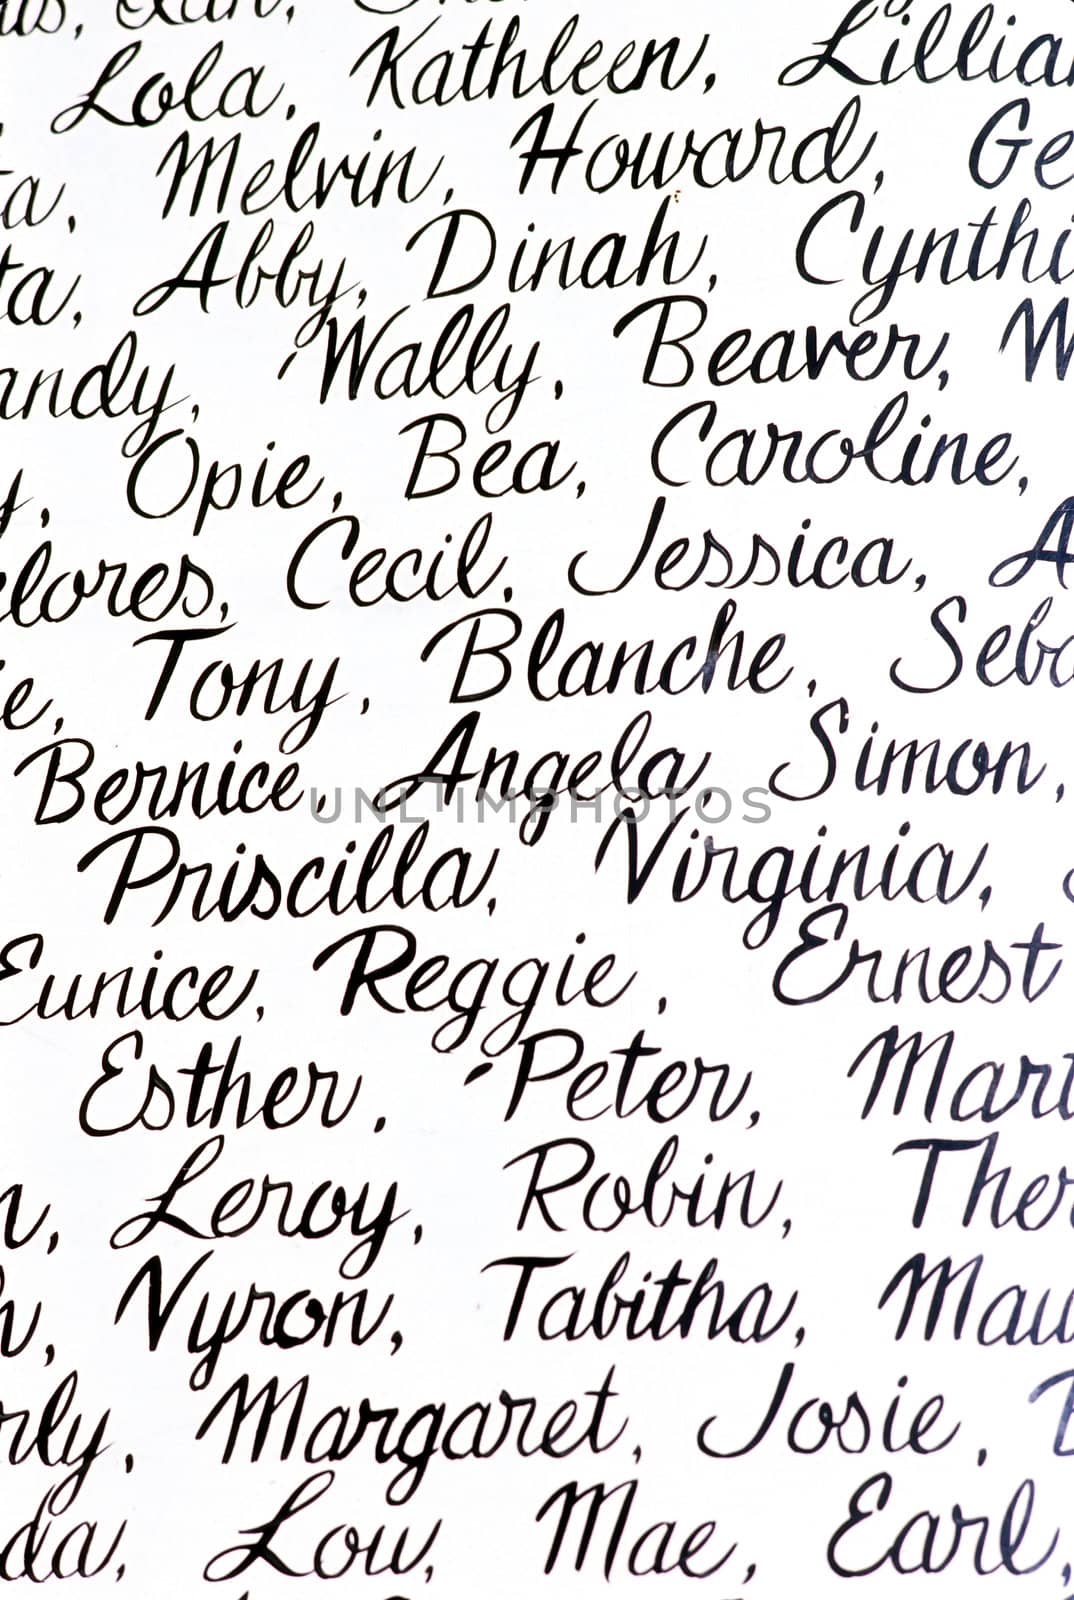 White background with people names written in cursive handwriting.